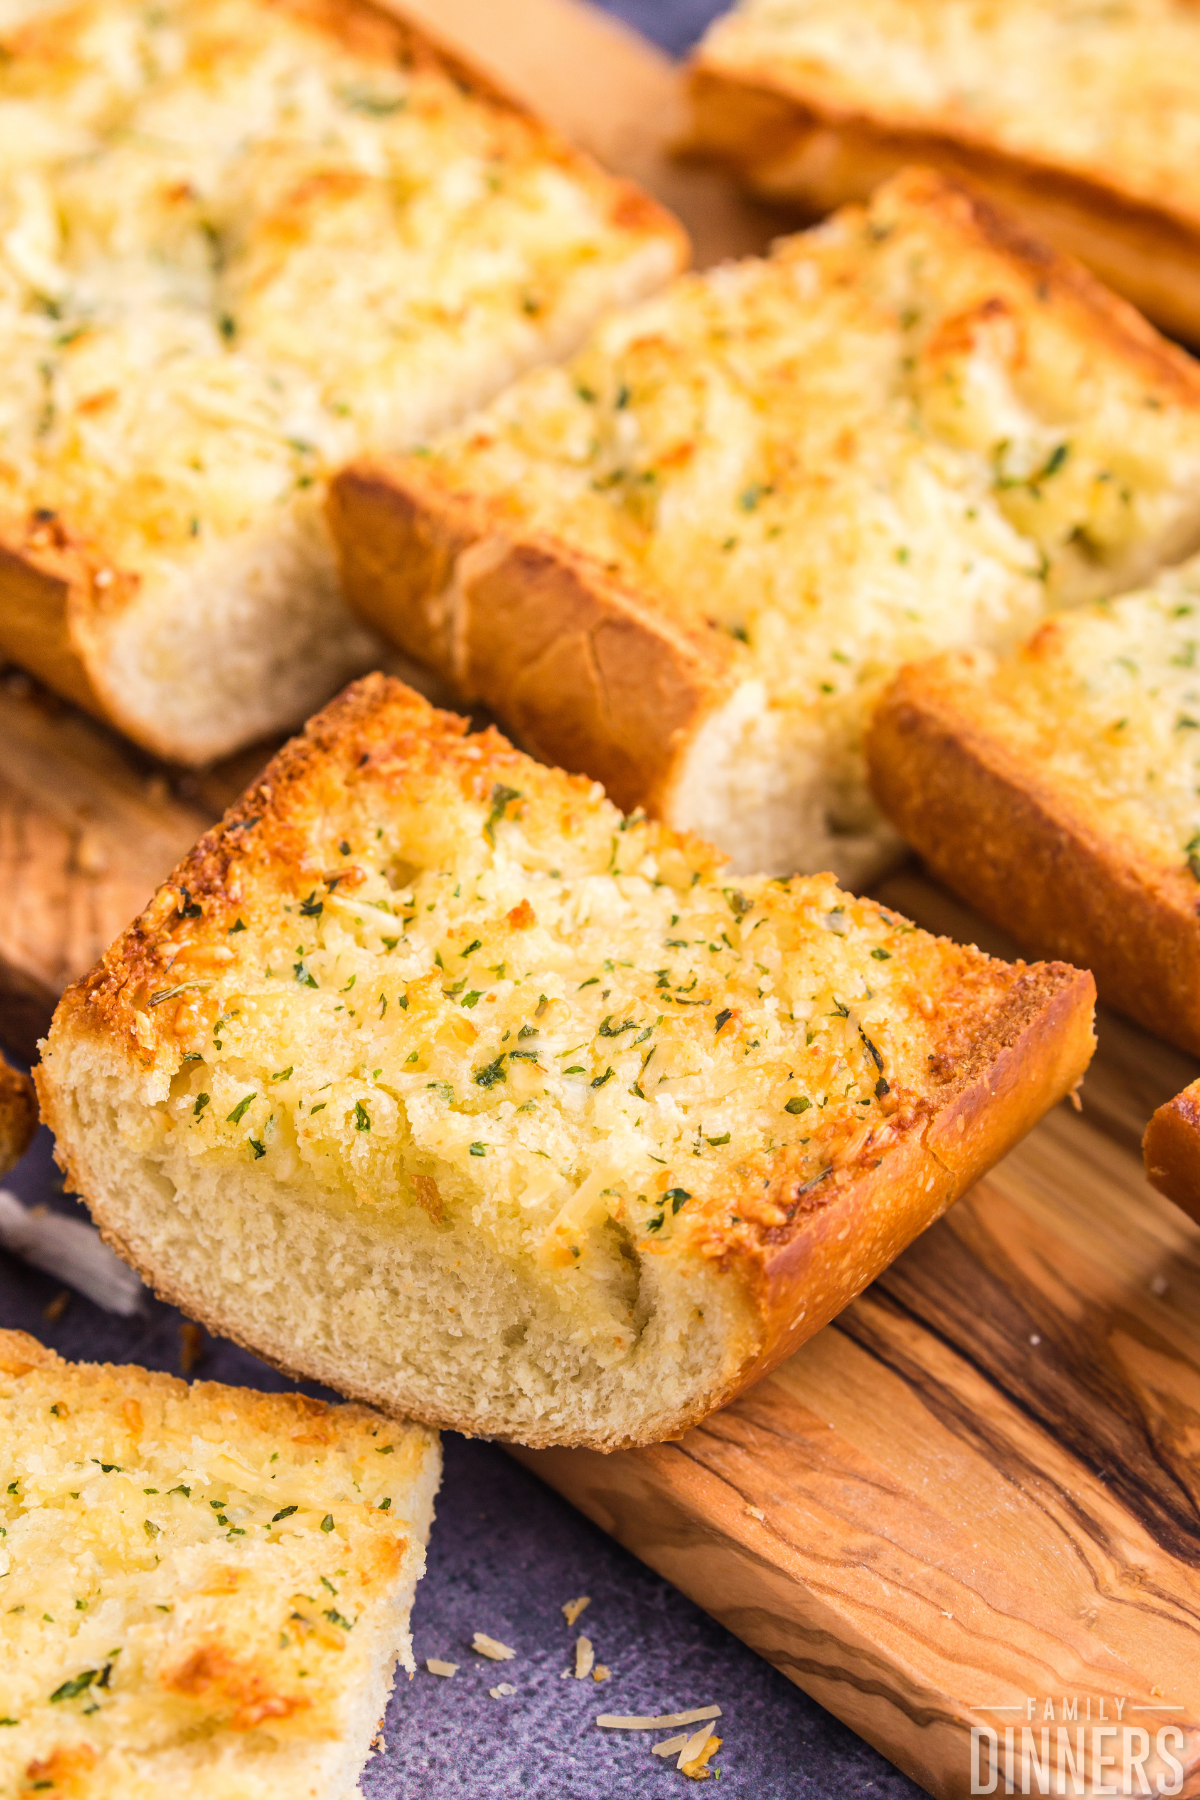 This slices of garlic cheese bread with garlic butter and parmesan cheese on top sitting on a wood cutting board.